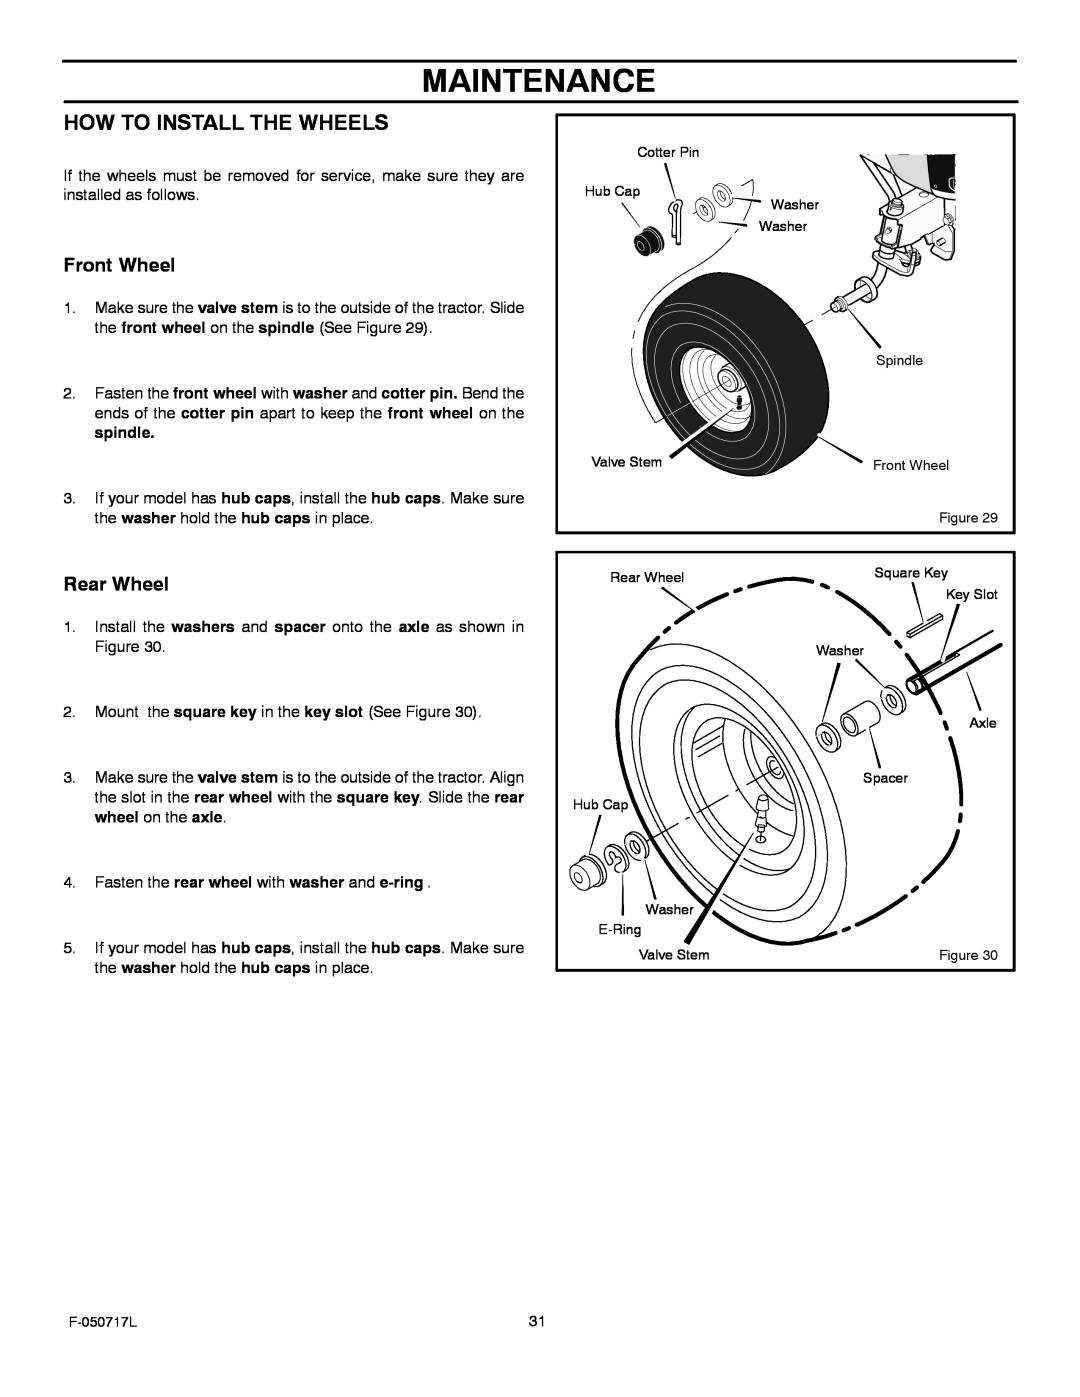 Murray 387002x92D manual Maintenance, How To Install The Wheels, Front Wheel, Rear Wheel 